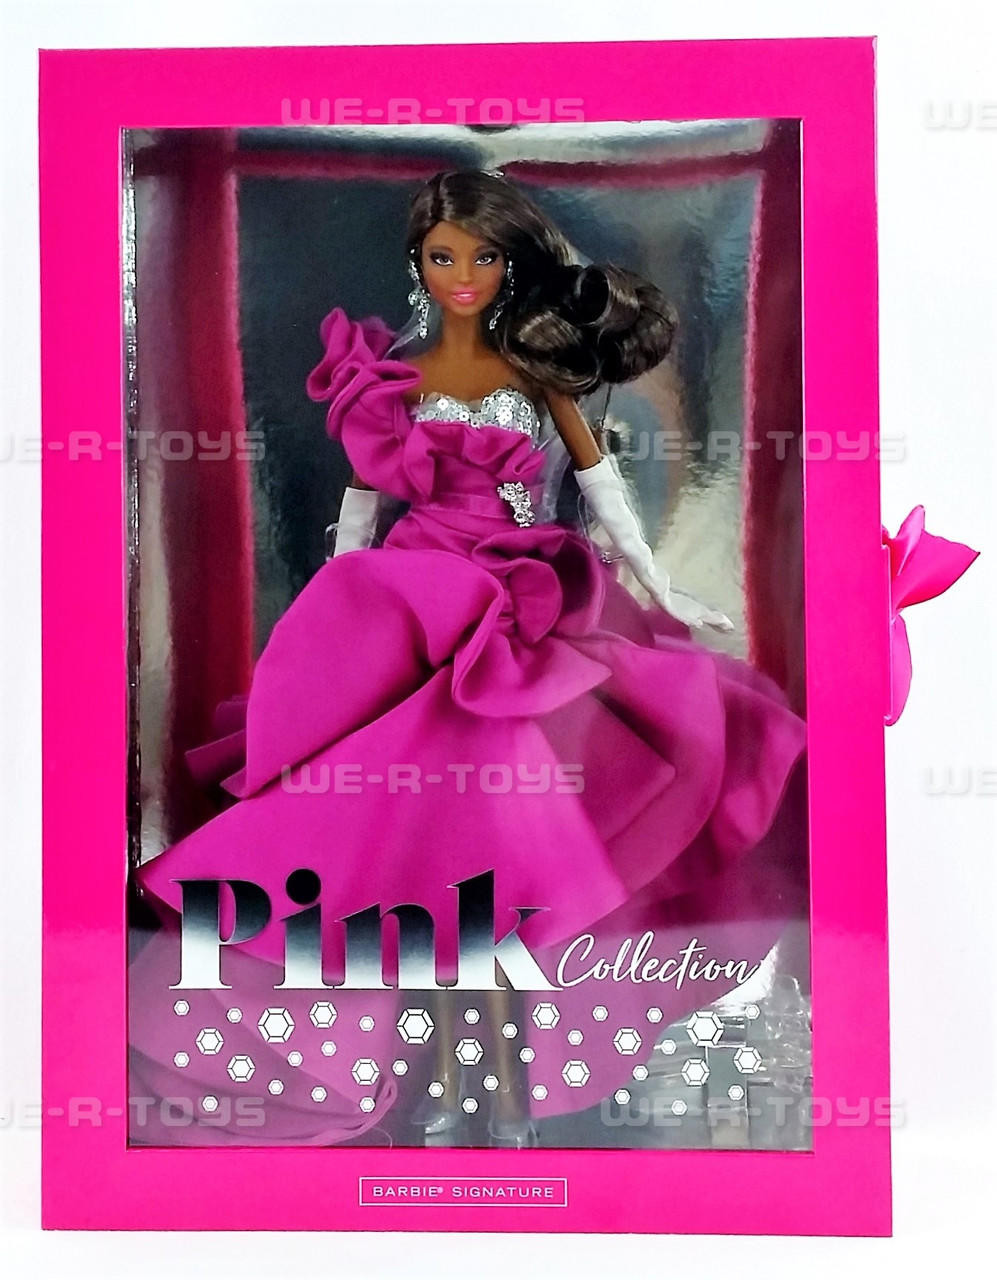 https://cdn11.bigcommerce.com/s-cy4lua1xoh/images/stencil/1280x1280/products/21347/176352/barbie-signature-pink-collection-barbie-doll-2-african-american-aa-2021-nrfb__30659.1689715310.jpg?c=1